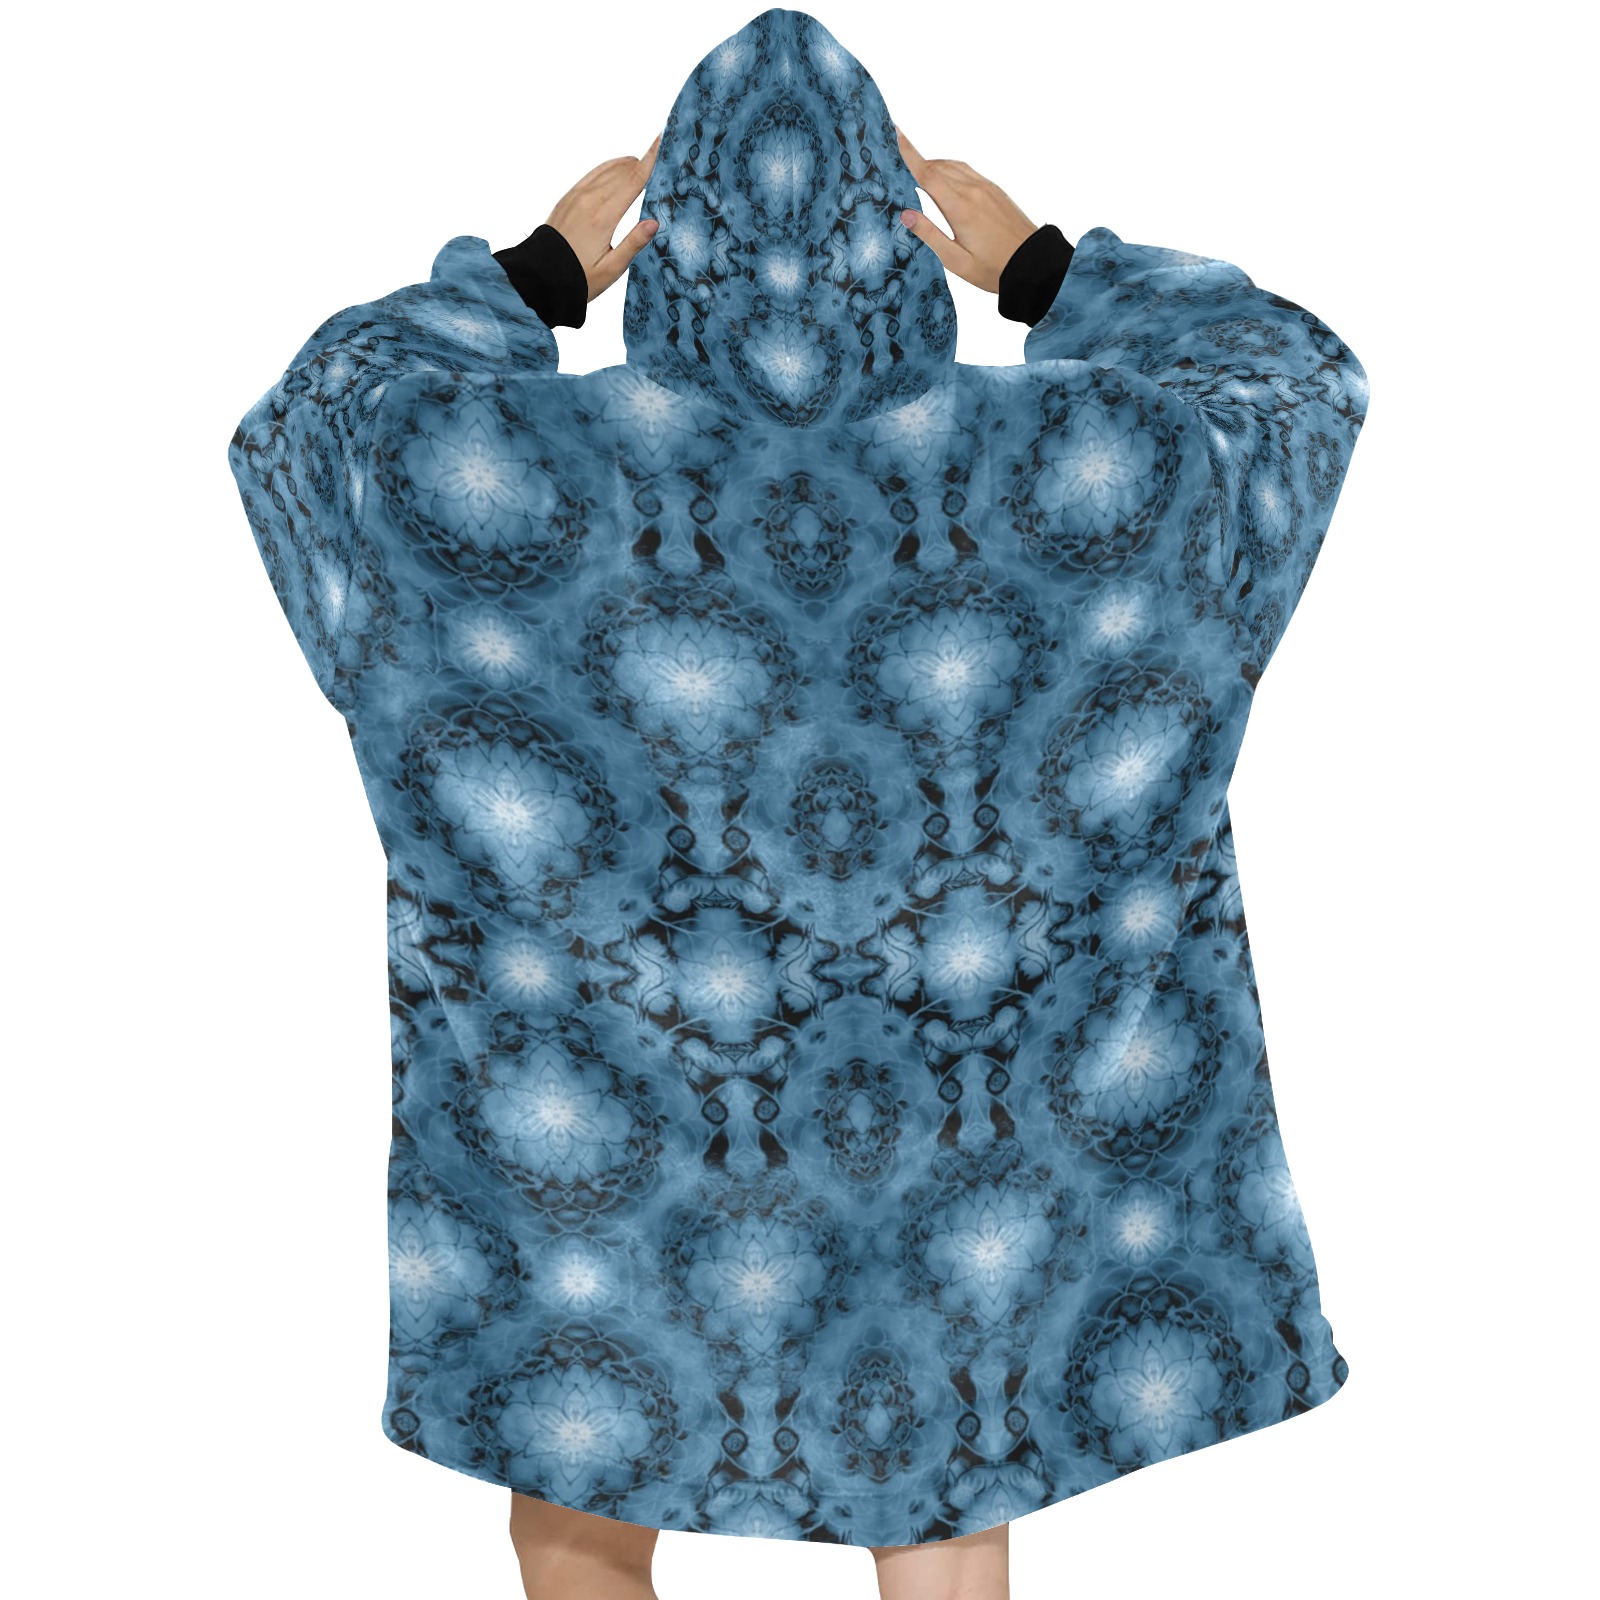 Nidhi decembre 2014-pattern 7-44x55 inches-blue Blanket Hoodie for Women